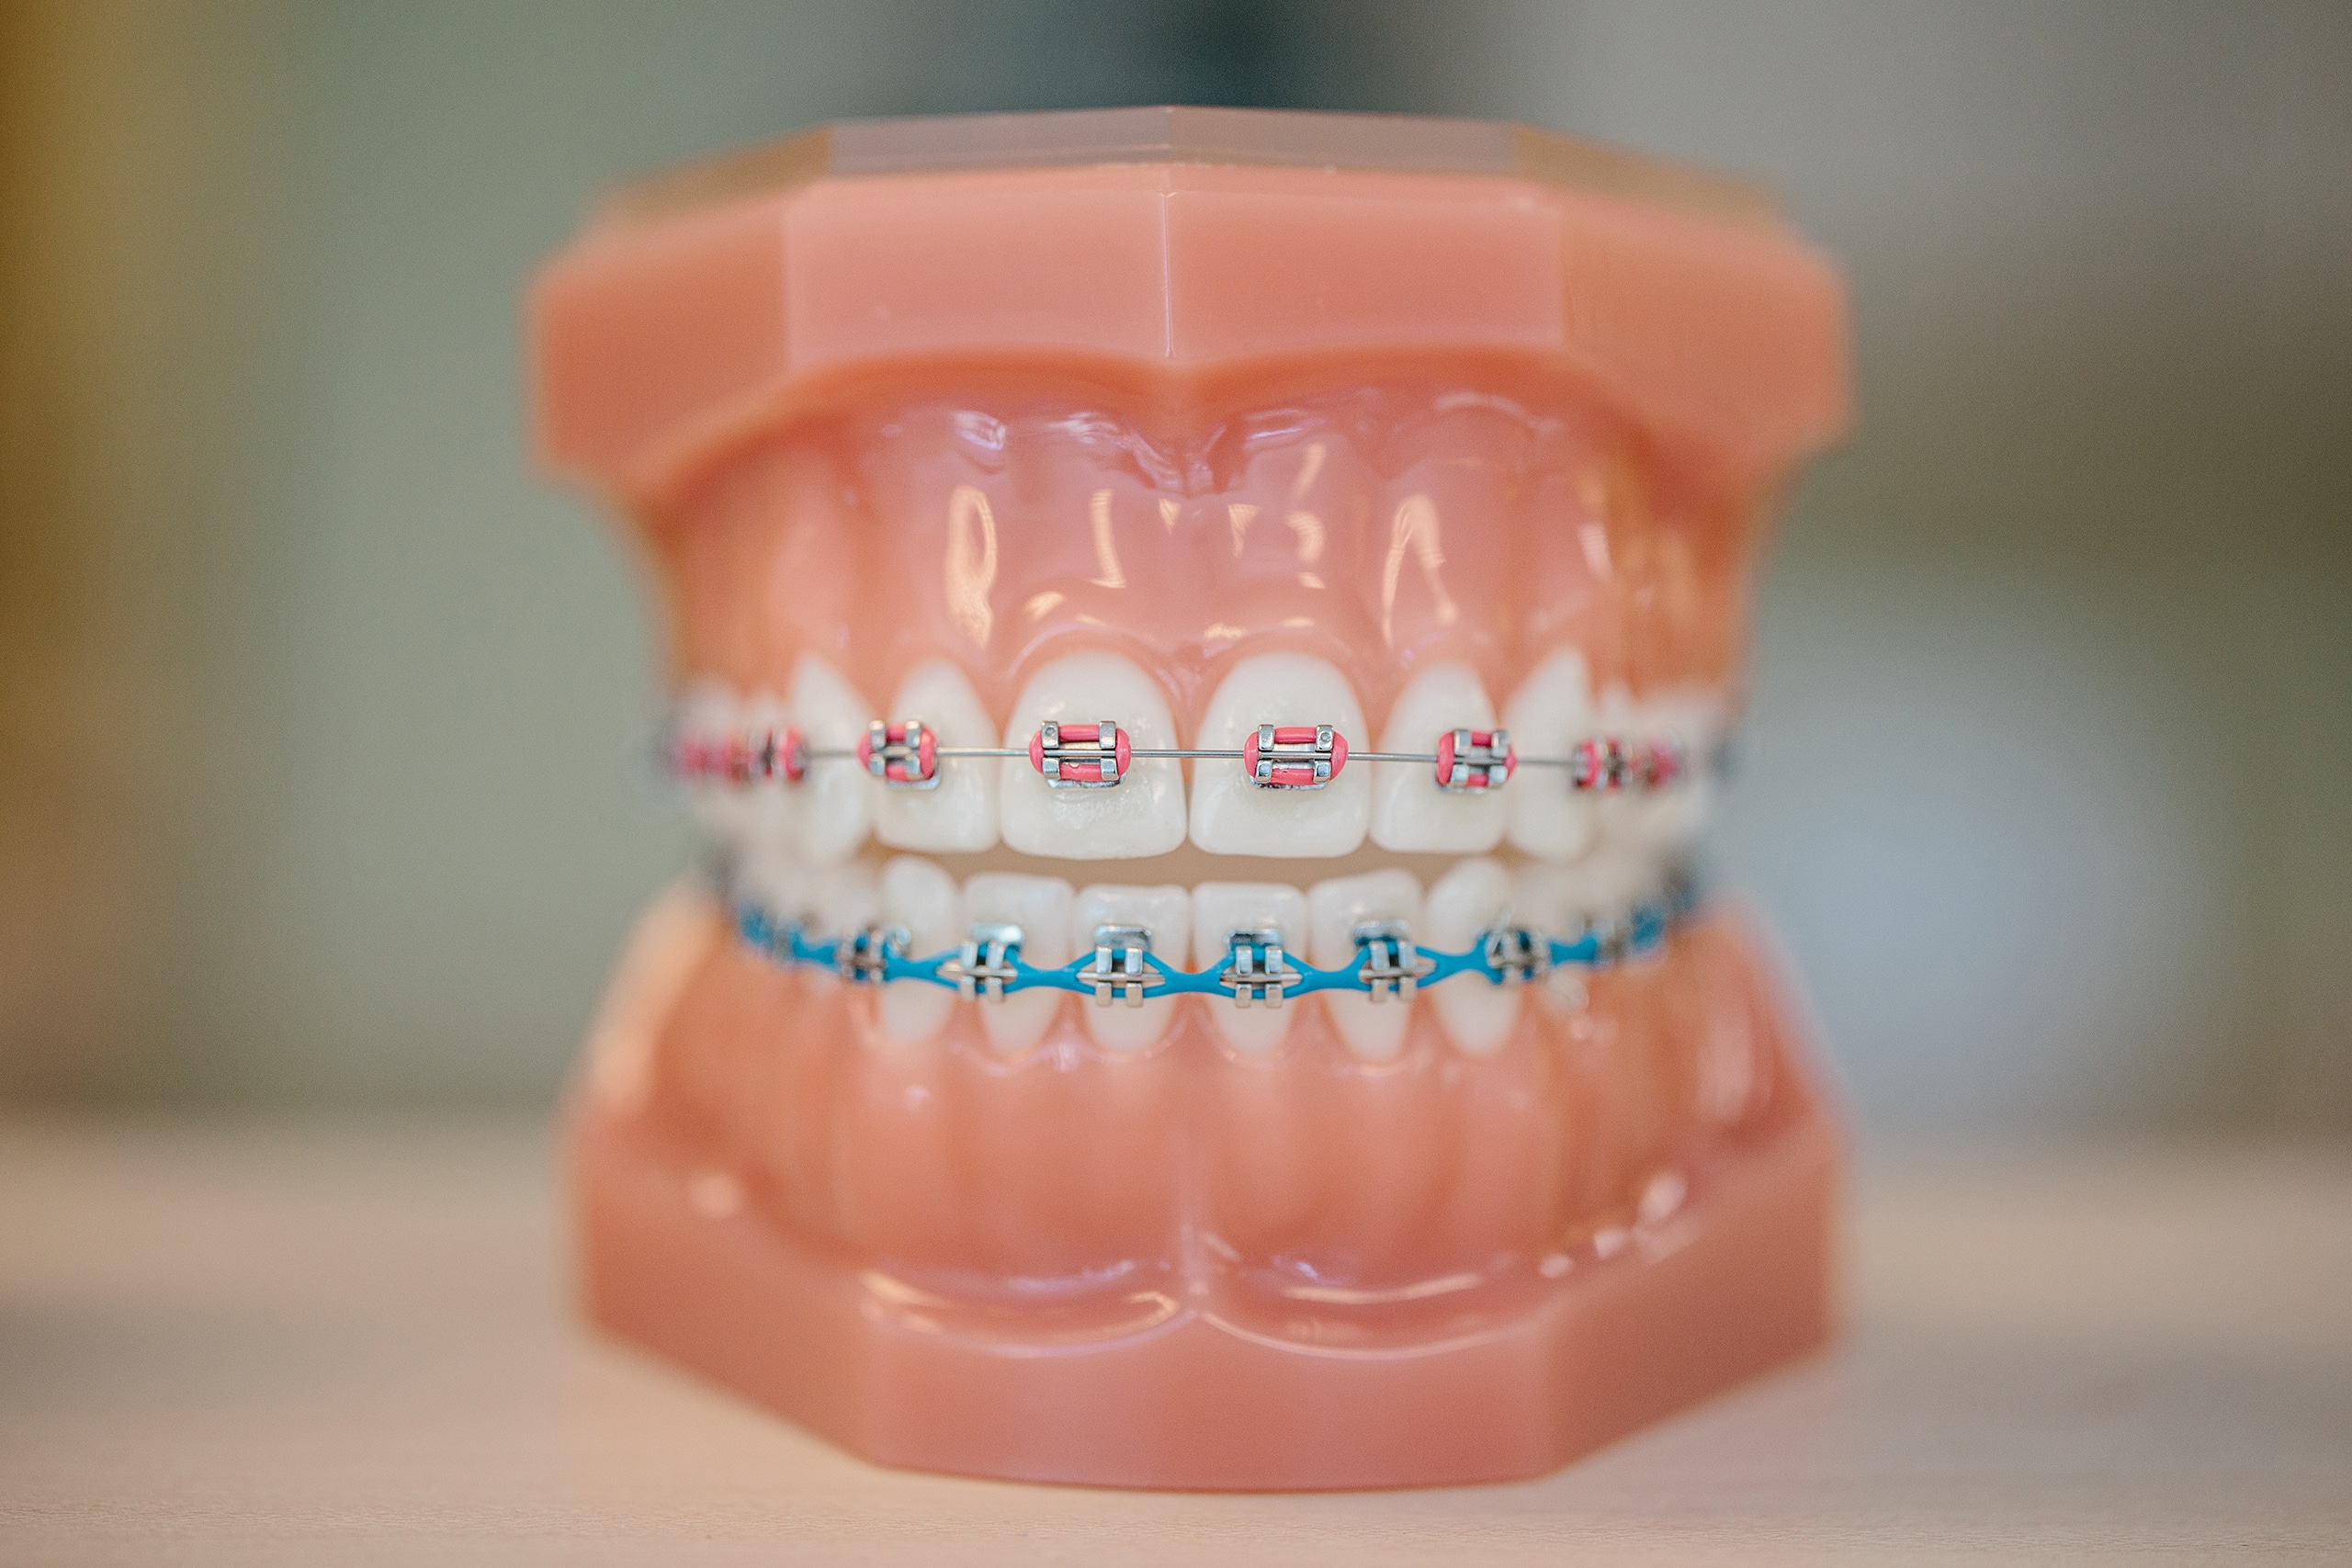 Plastic model of teeth with metal braces and pink and blue elastic bands.